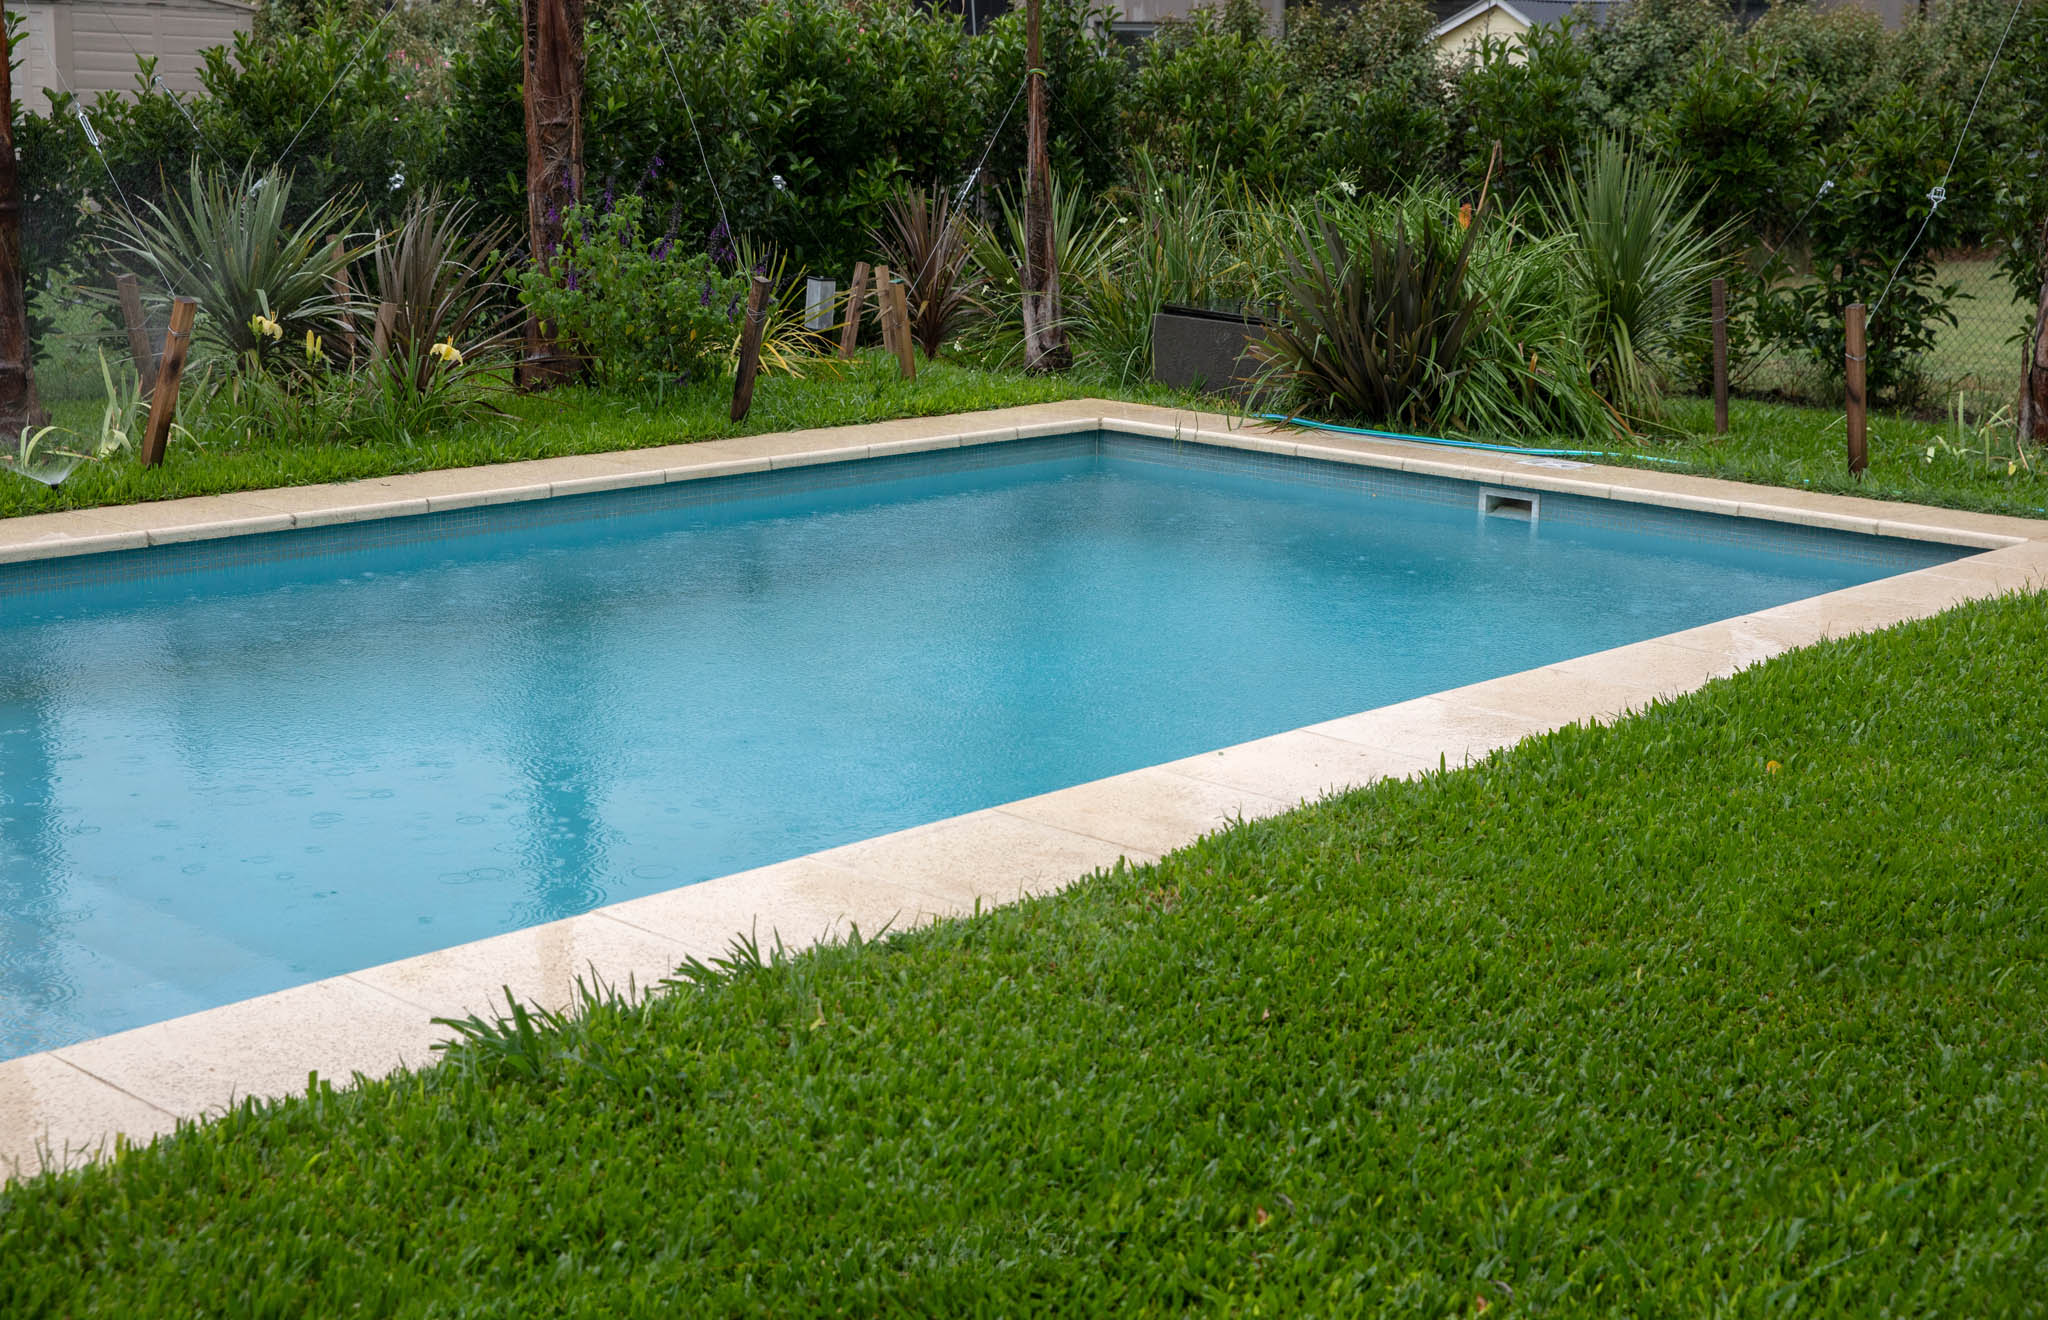 The,House,Rectangular,Swimming,Pool,And,Green,Grass,In,The